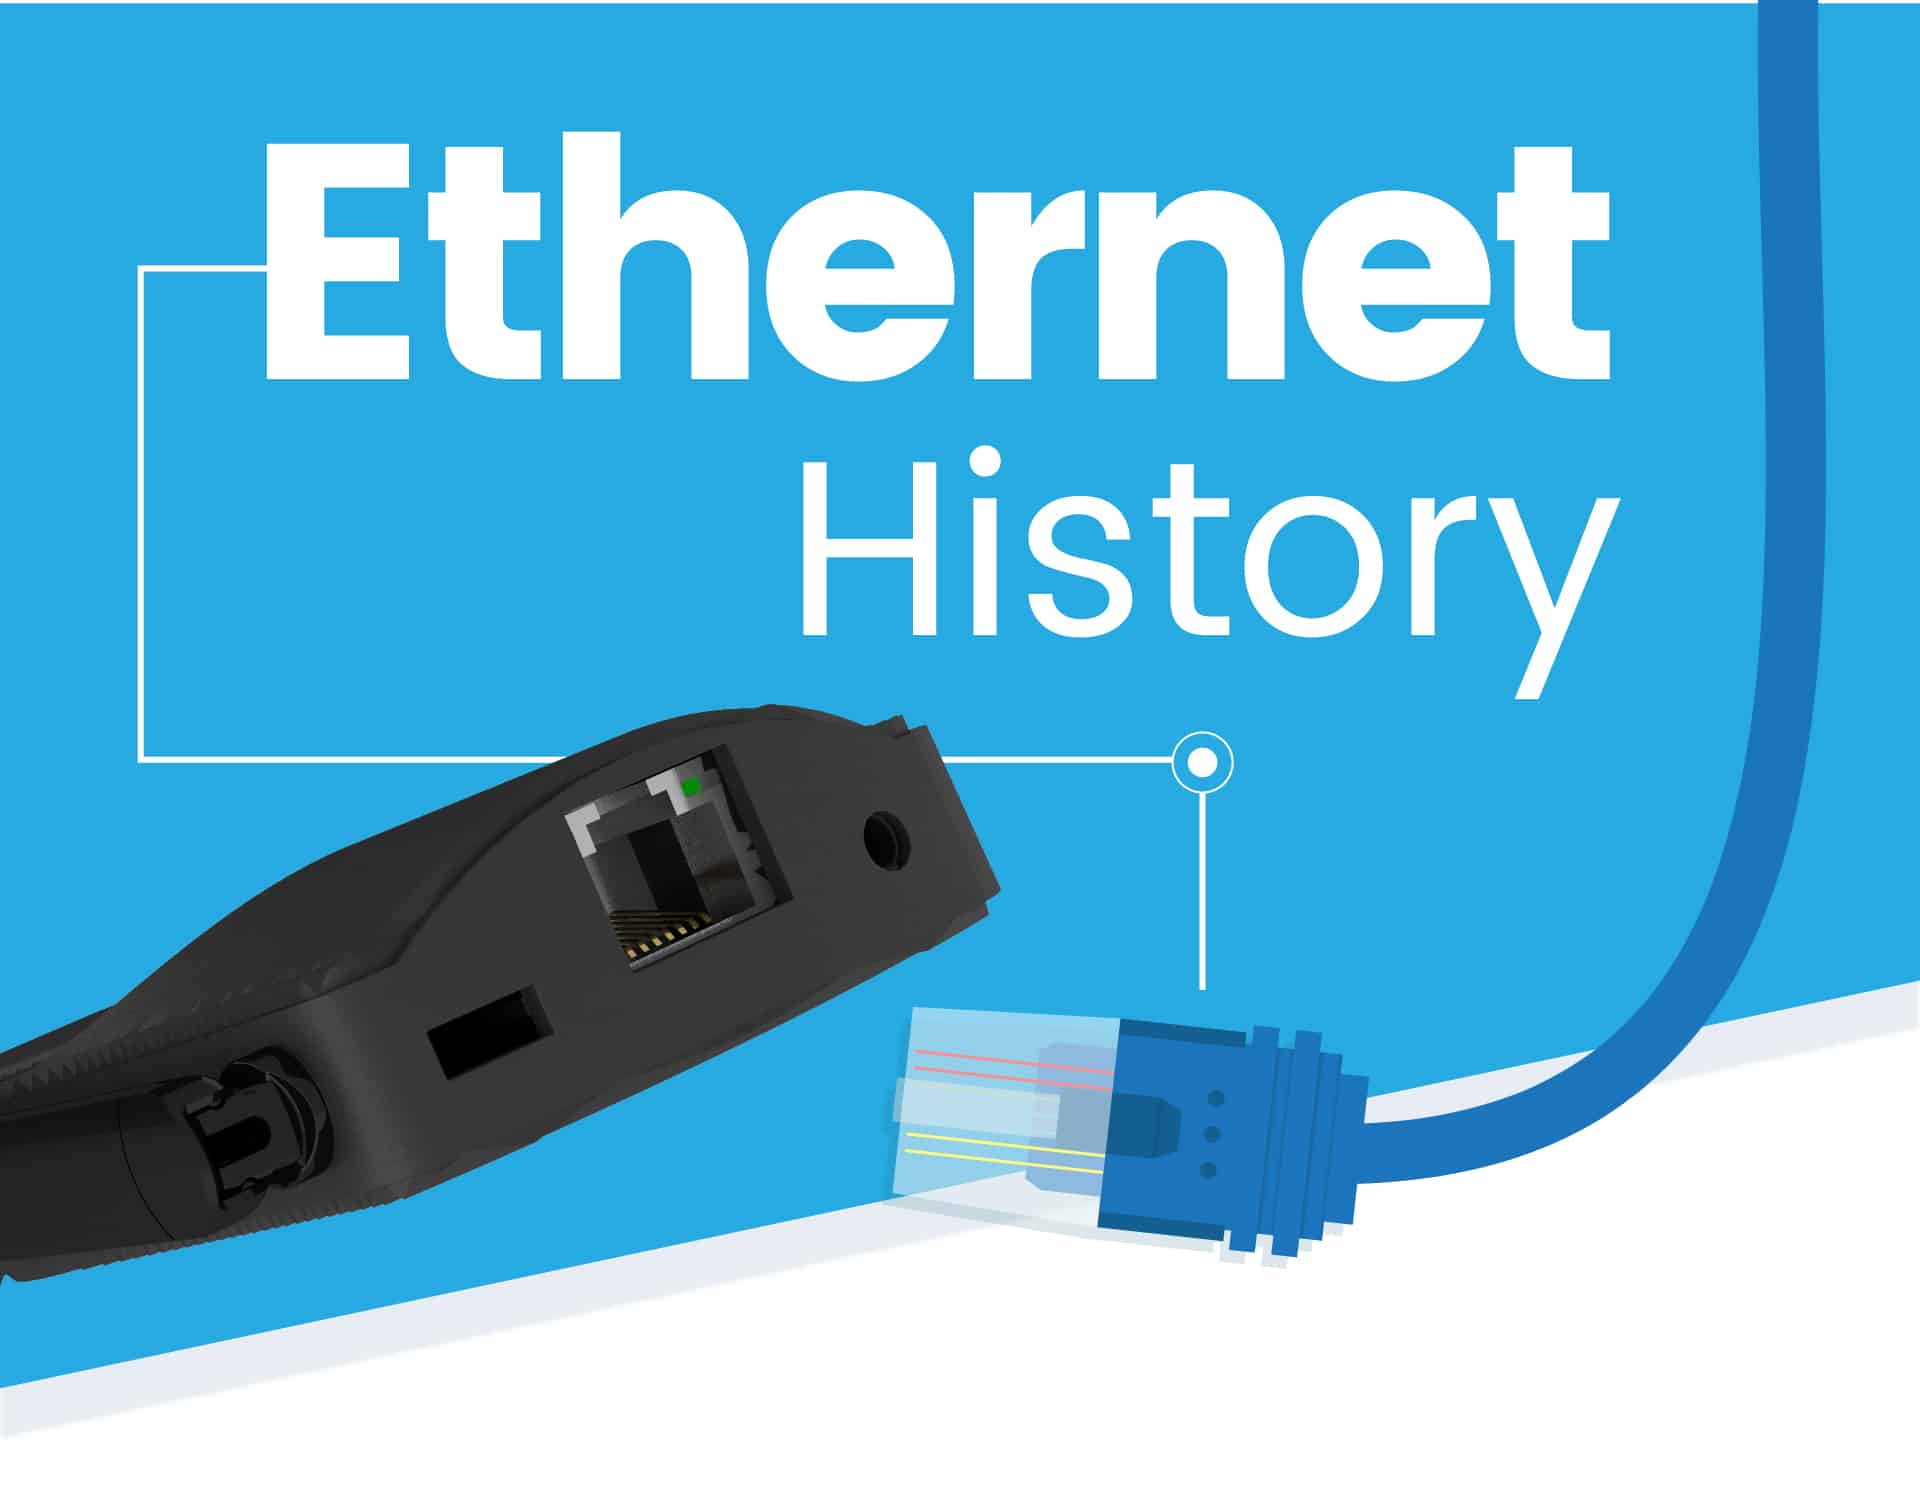 The Evolution of Portable Technology and The History of Ethernet